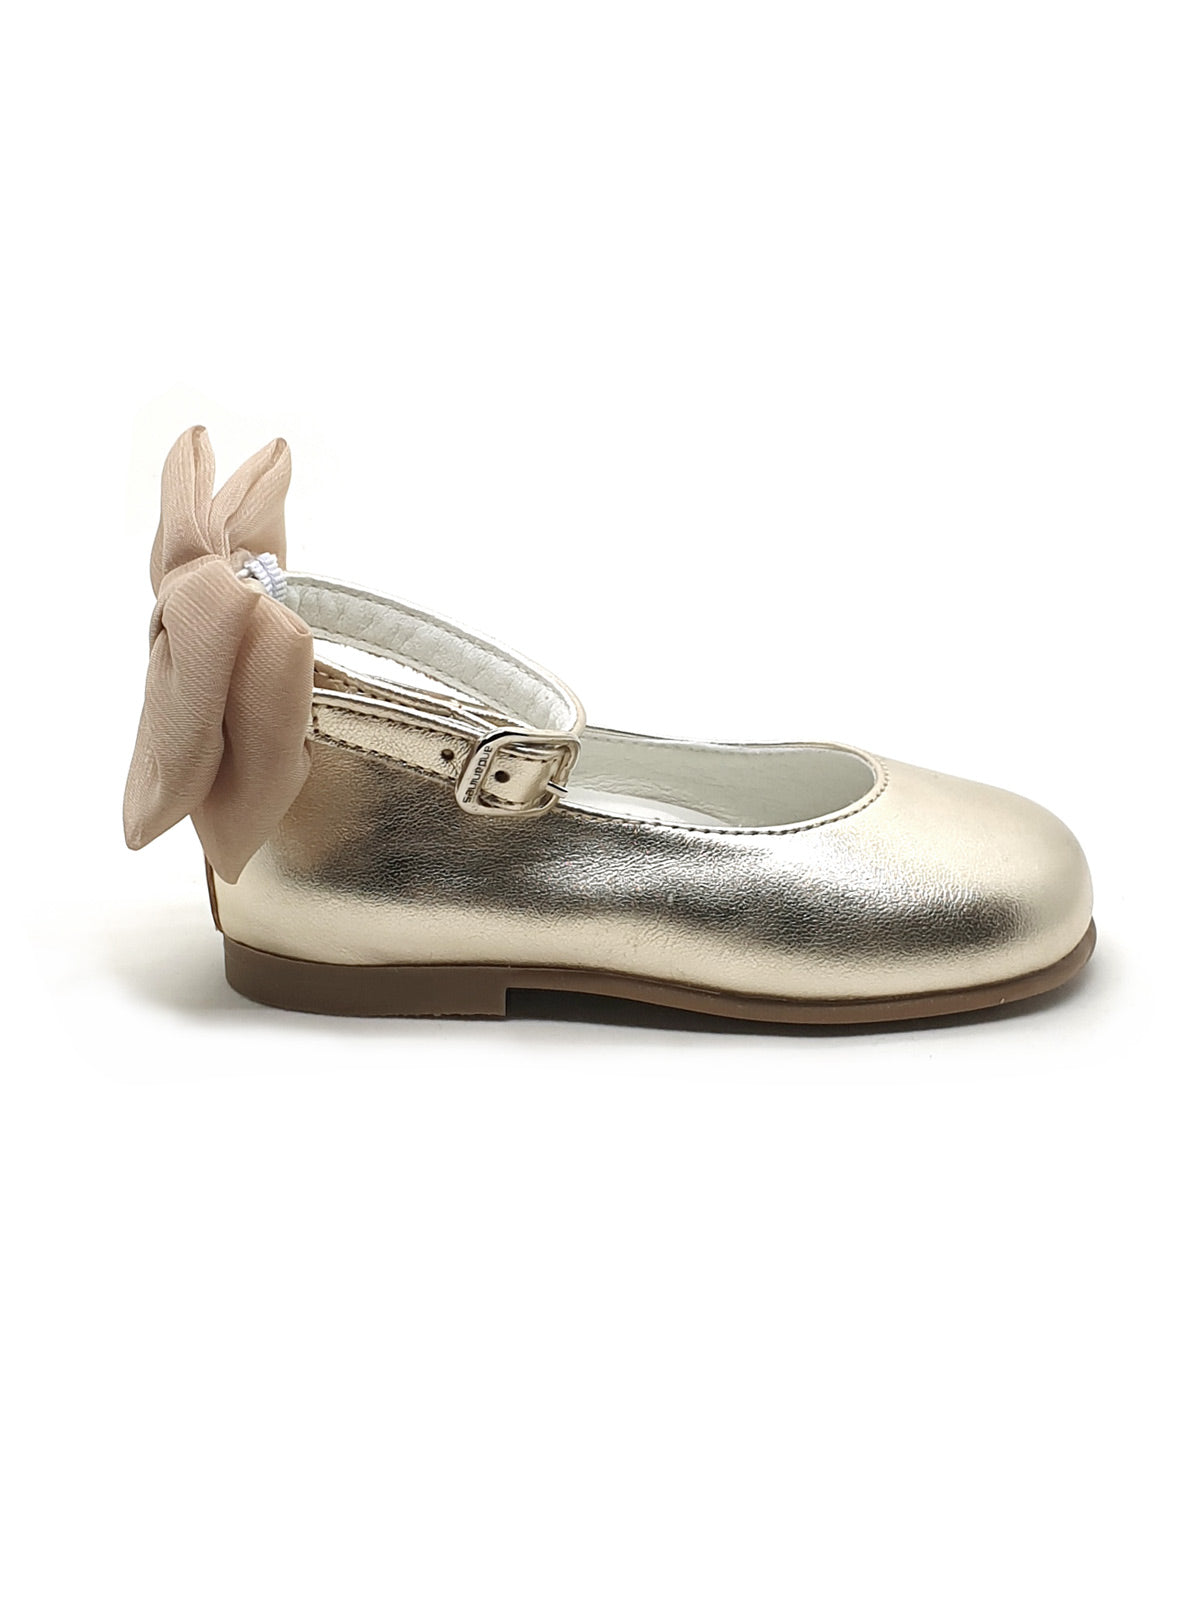 Girl's Ballerina Leather shoe with Bow